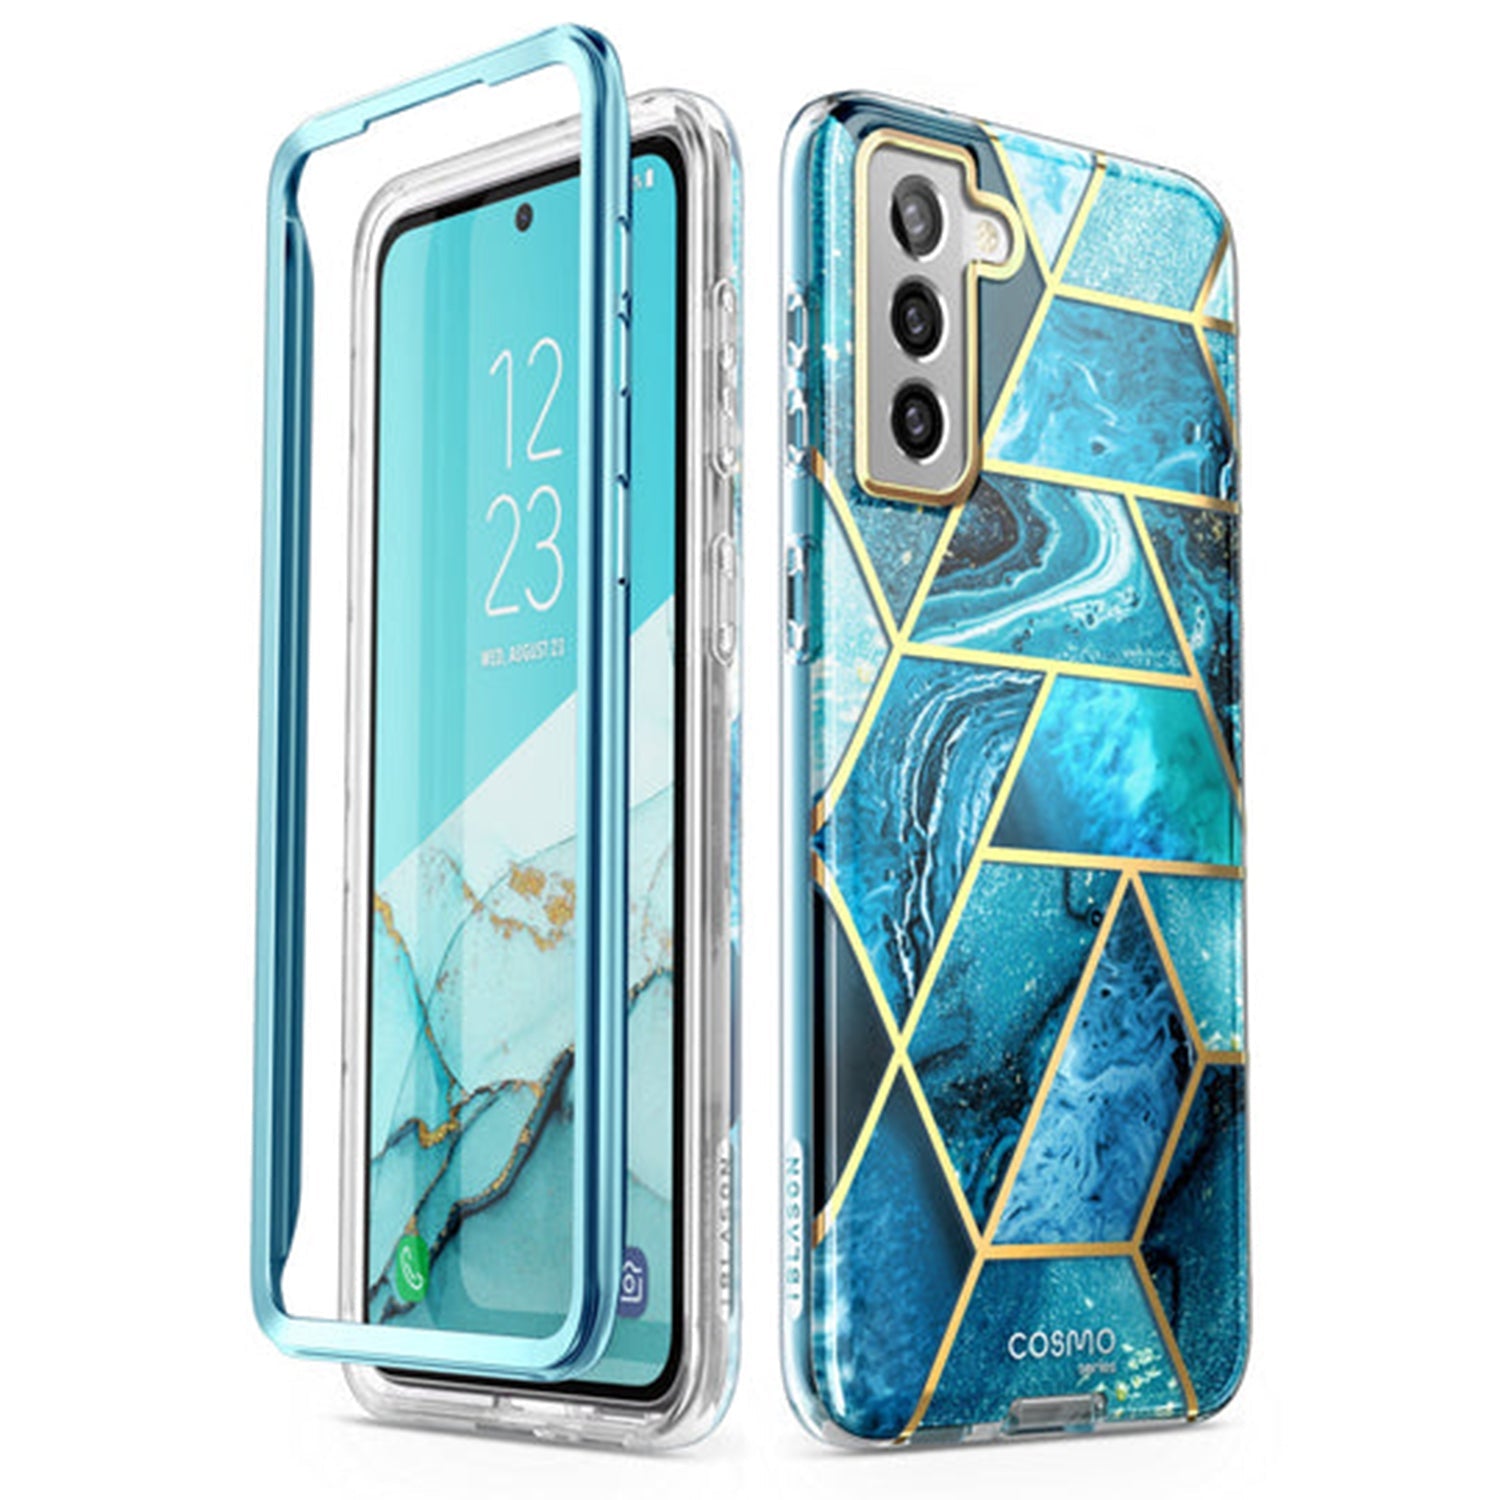 i-Blason Cosmo Series Slim Full-Body Stylish Protective Case for Samsung Galaxy S22 Plus 5G(With Build-in Screen Protector) Default i-Blason Ocean 